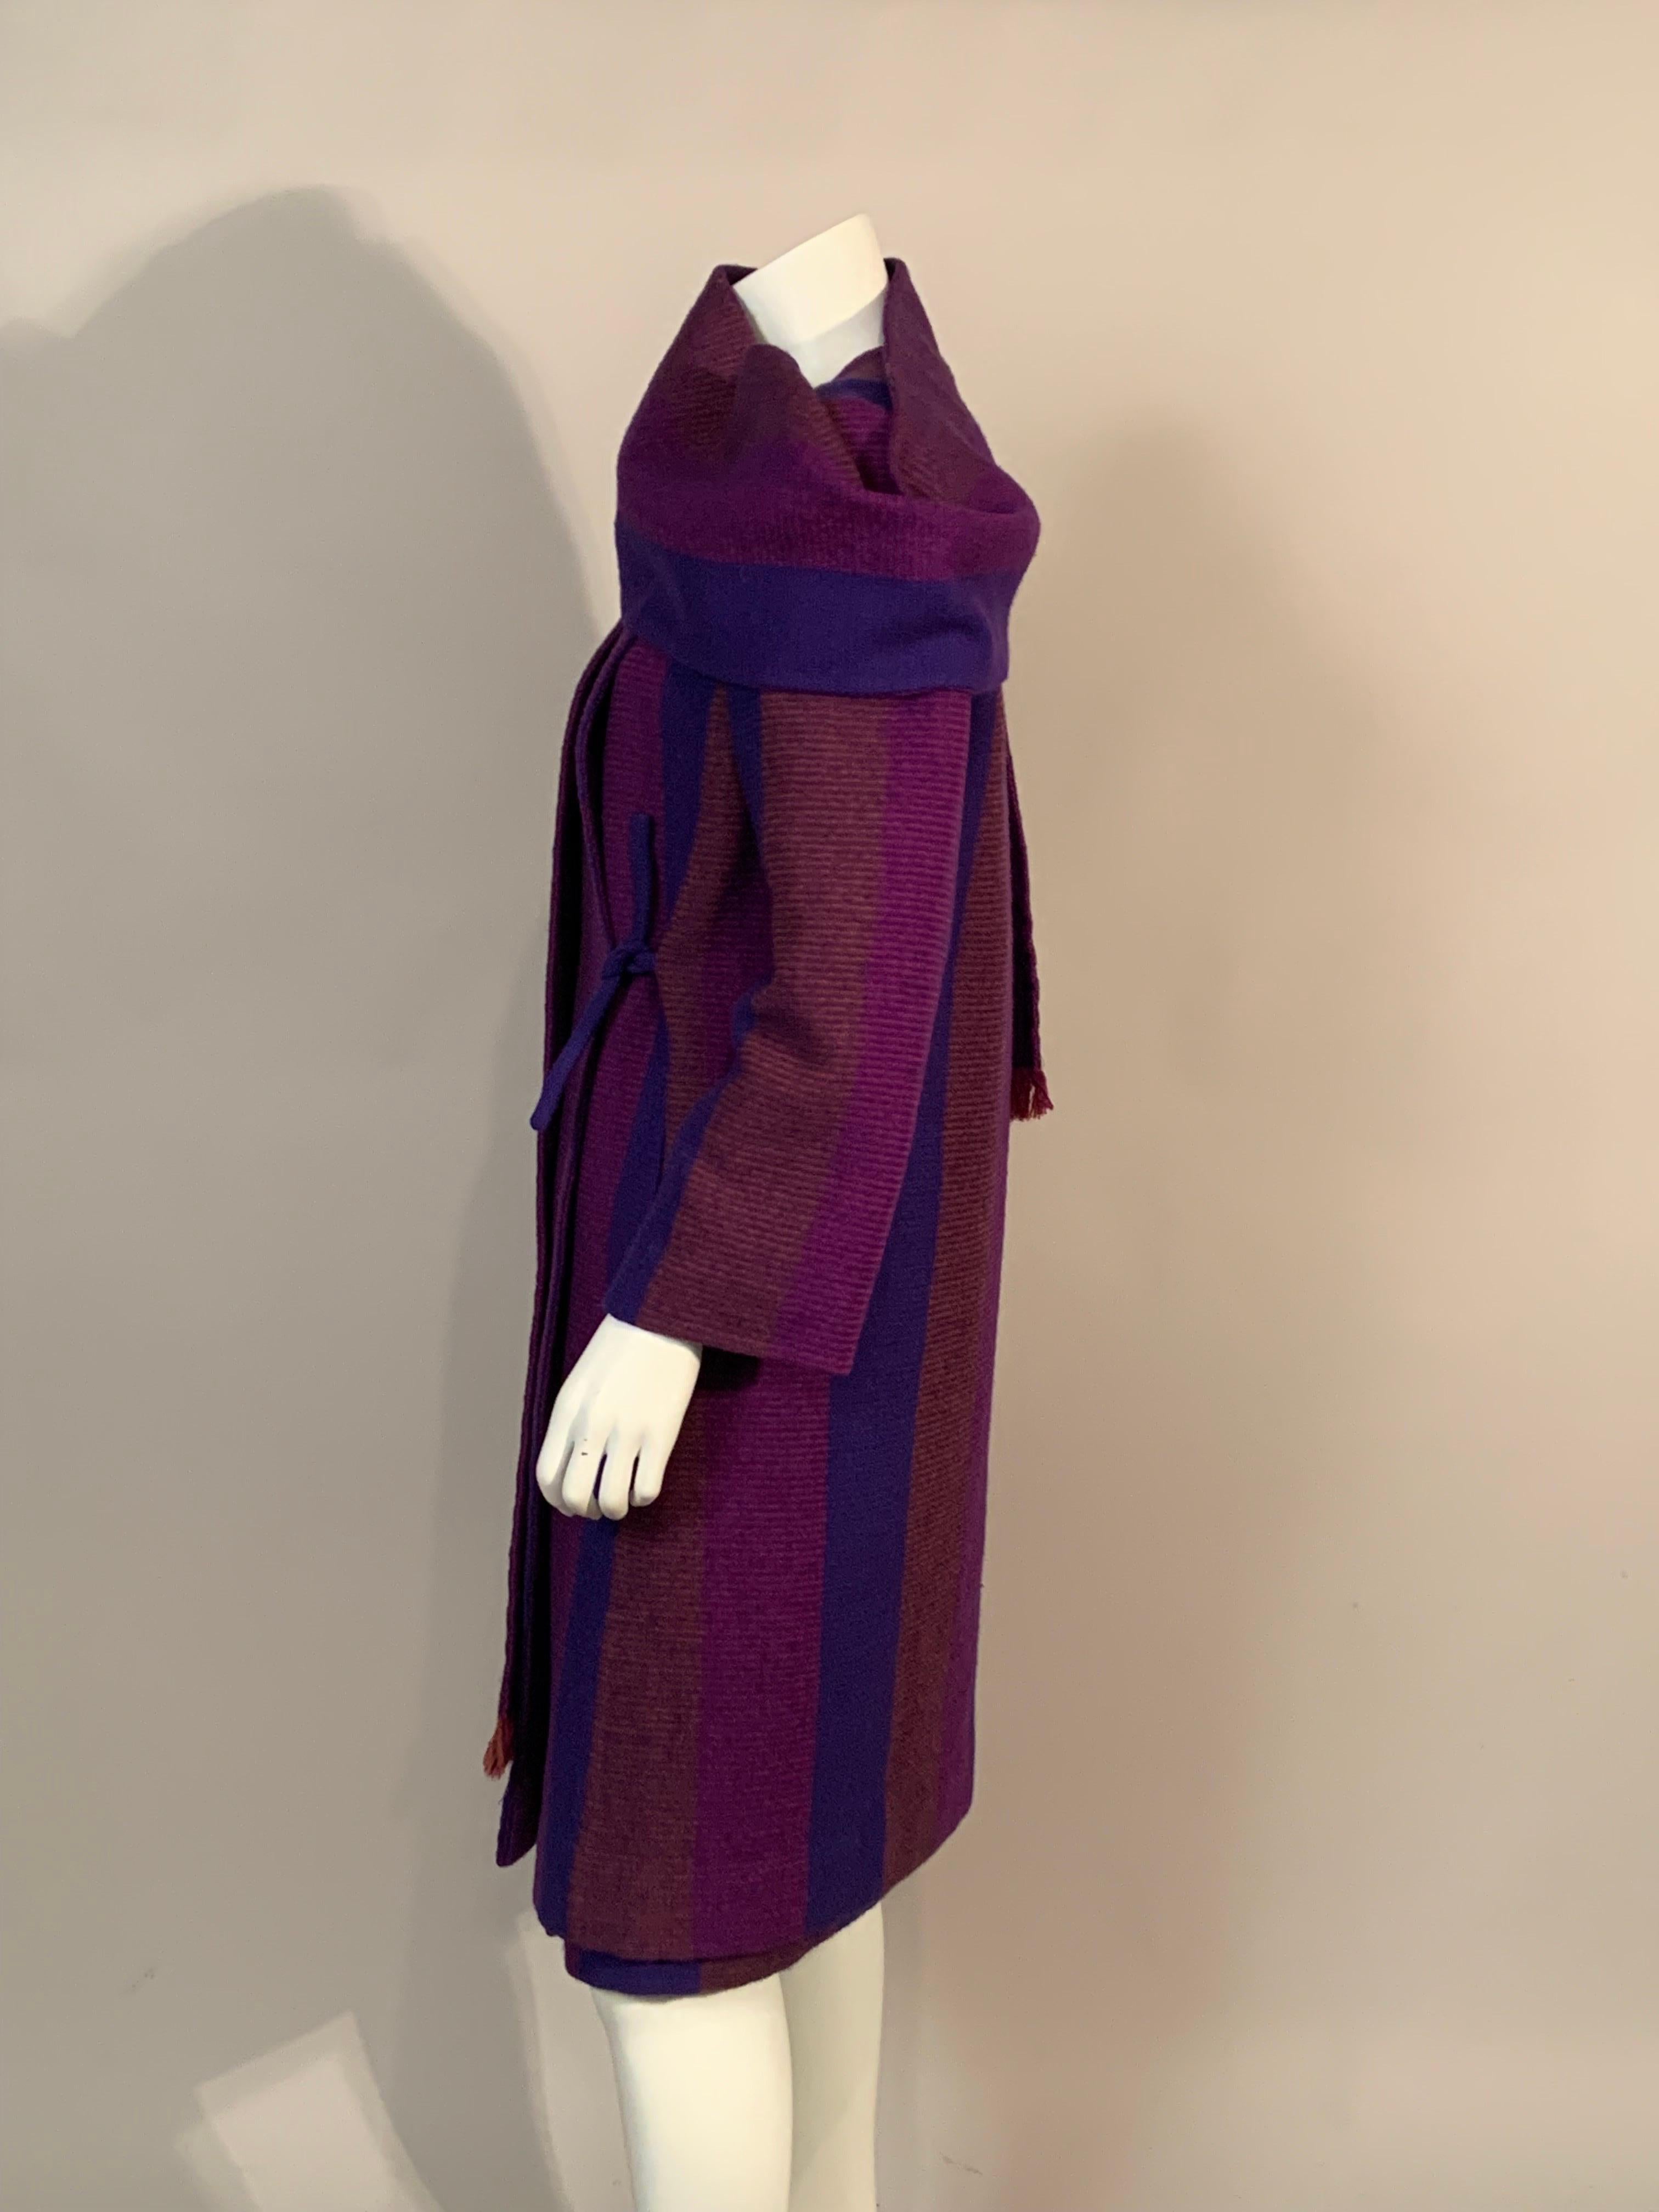 Pauline Trigere Multi Color Striped Wool Coat, Skirt and Matching Shawl For Sale 4